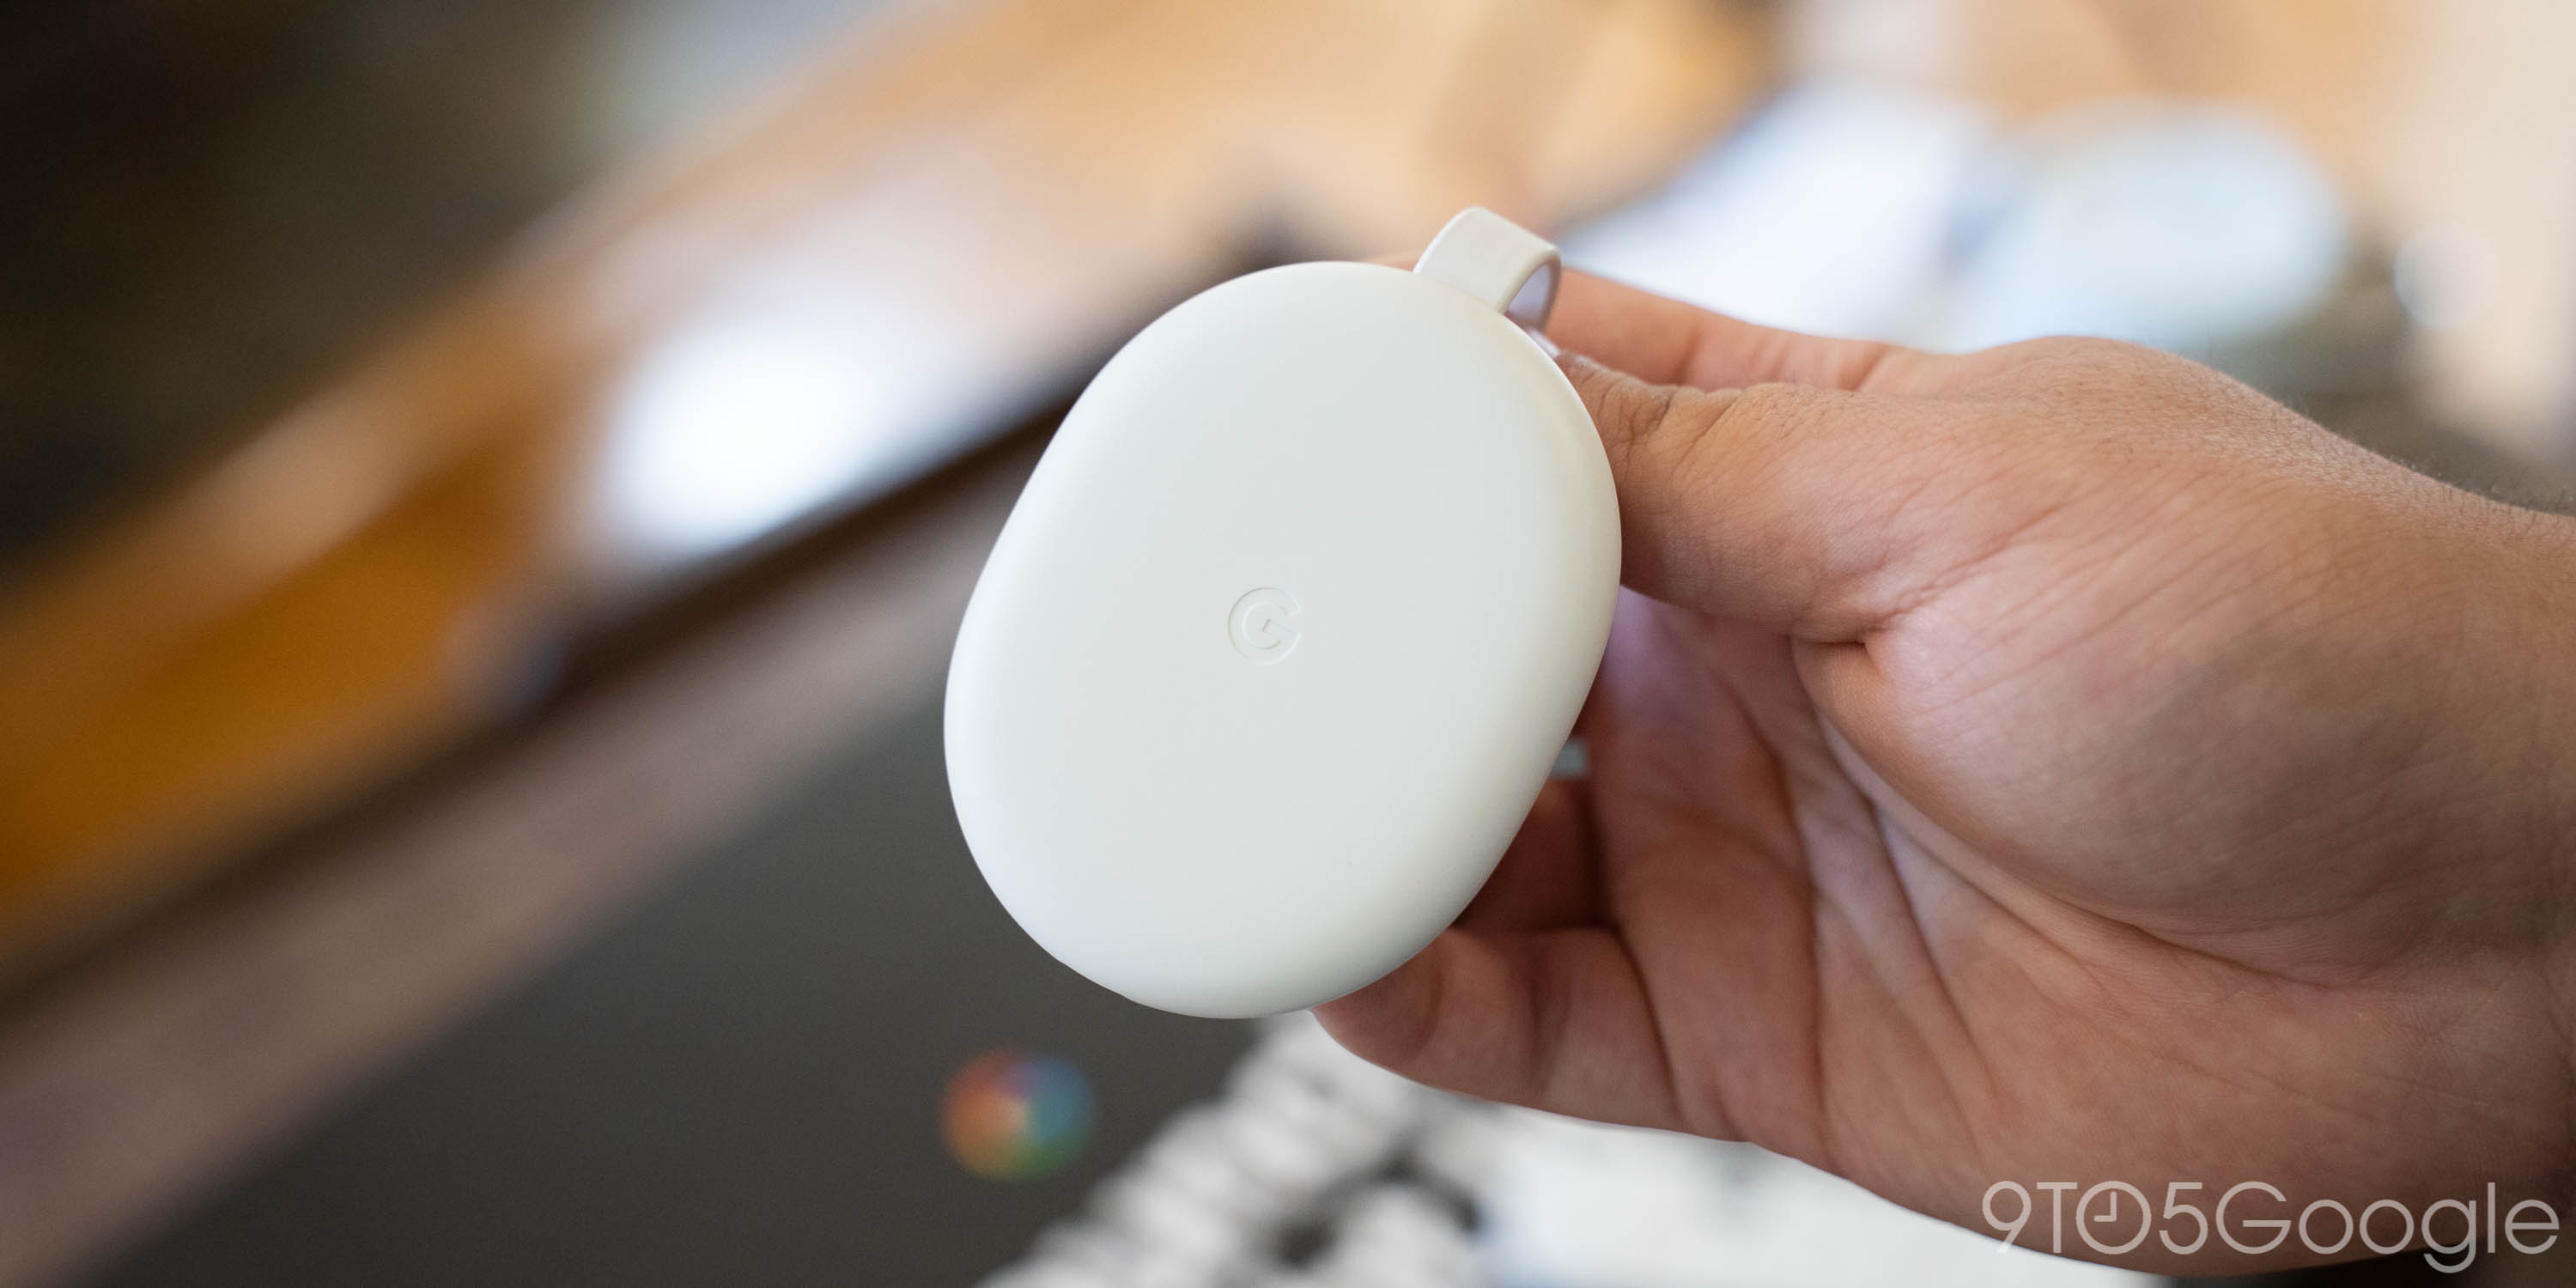 The Ethernet Adapter for the new Chromecast with Google TV will